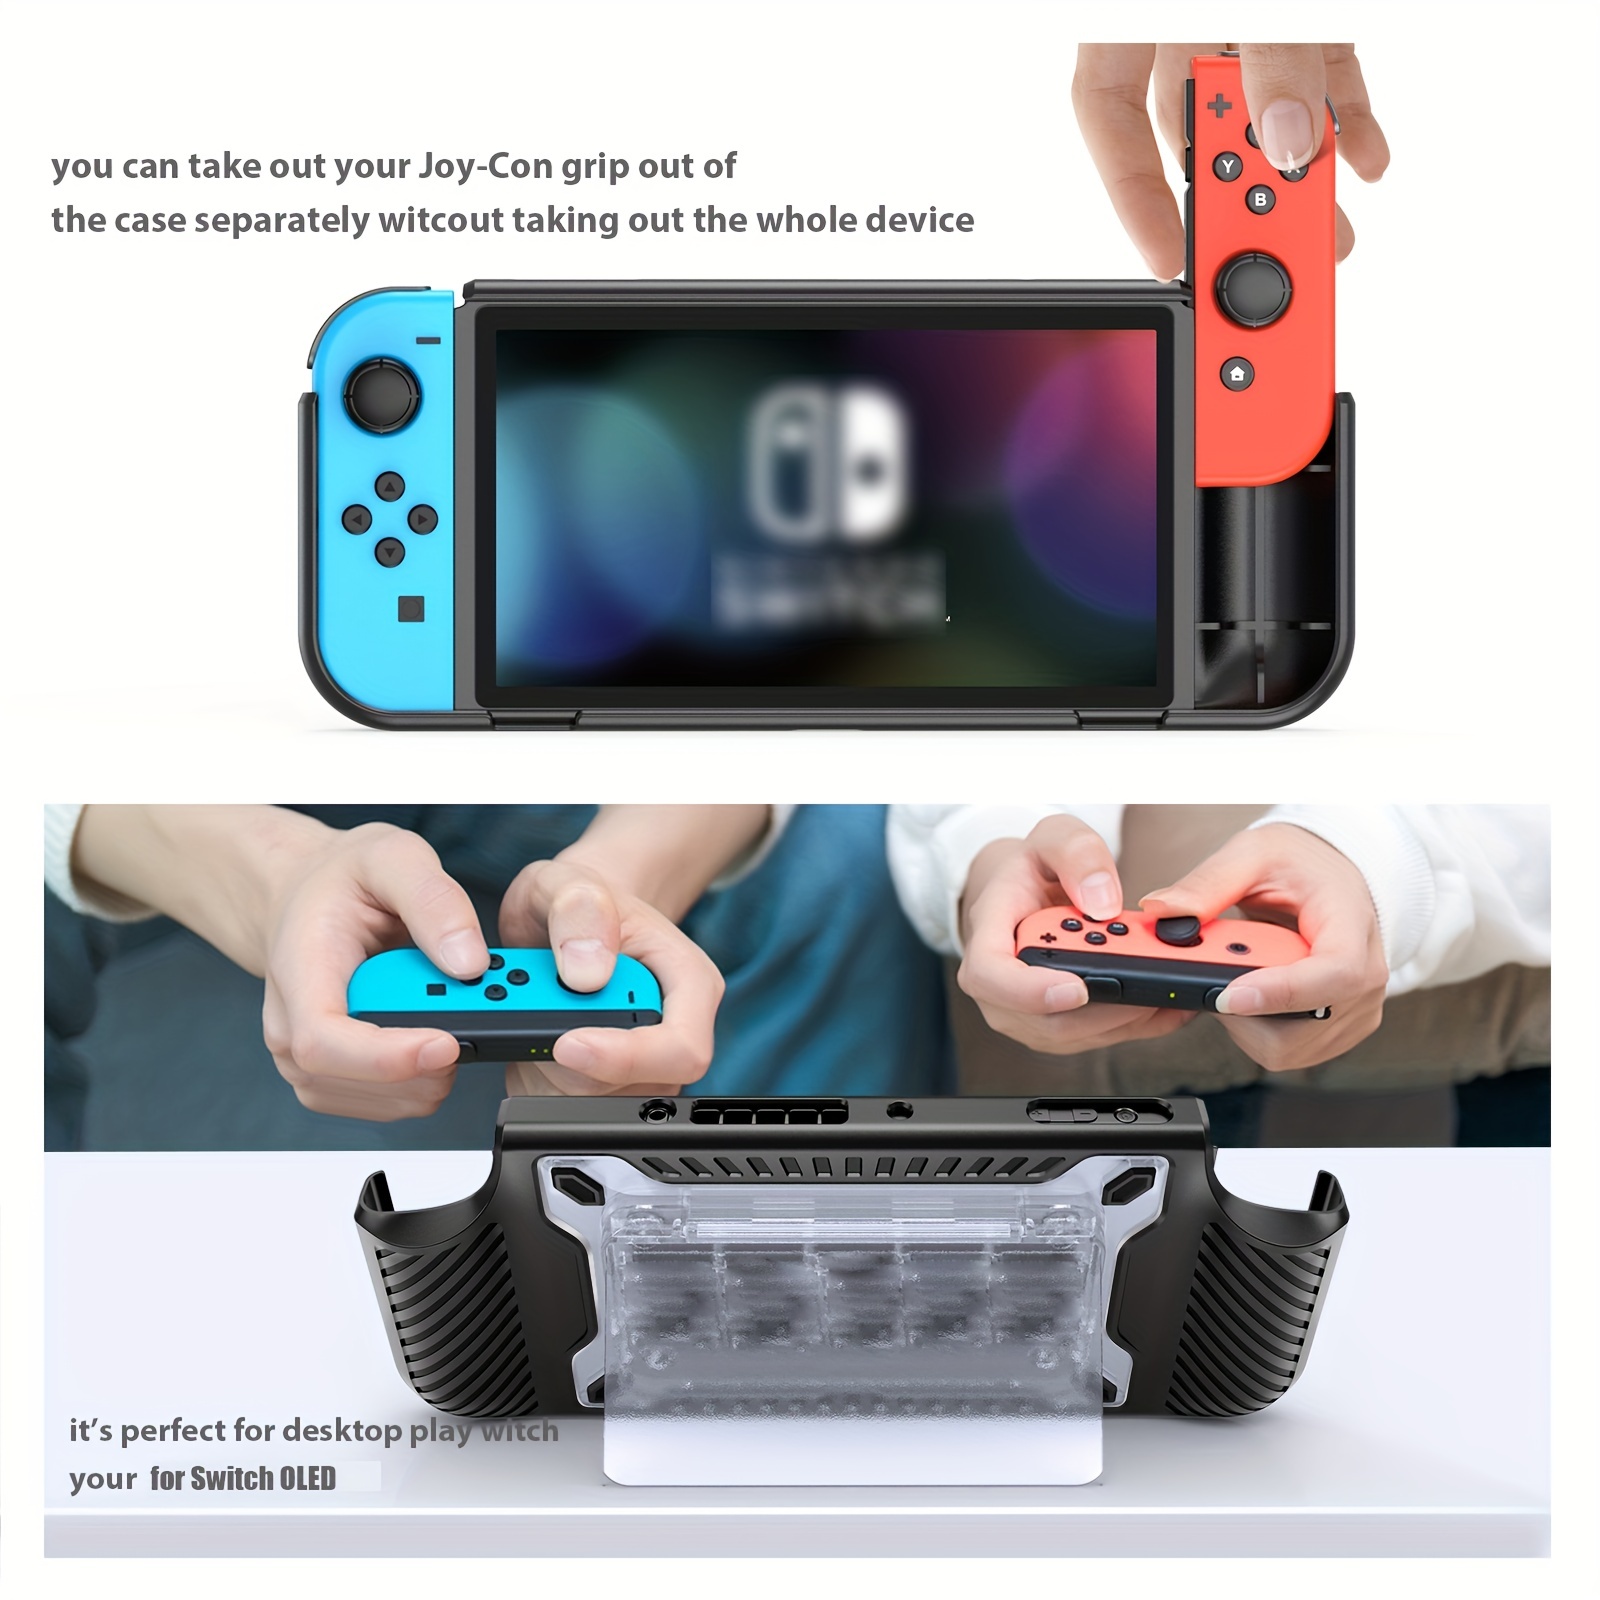 The Nintendo Switch OLED Dock Can Be Purchased Separately